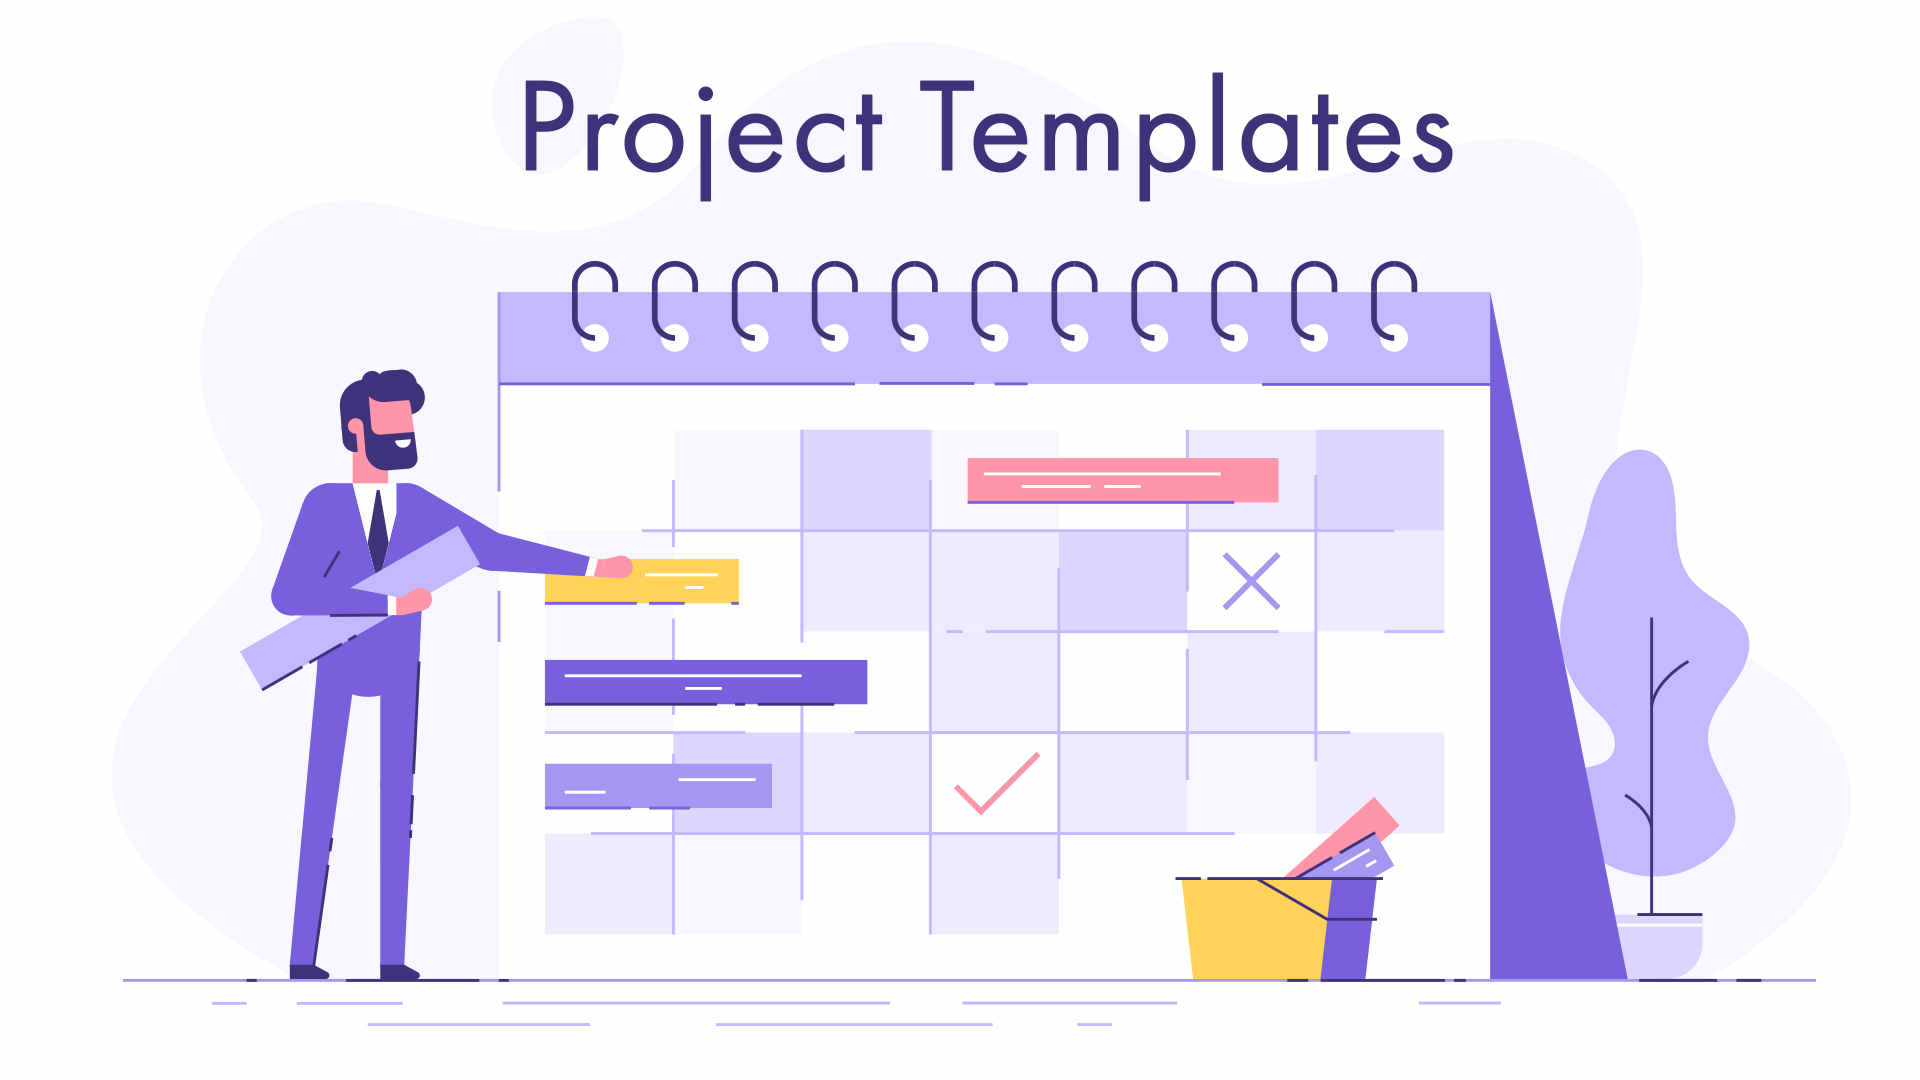 Project templates